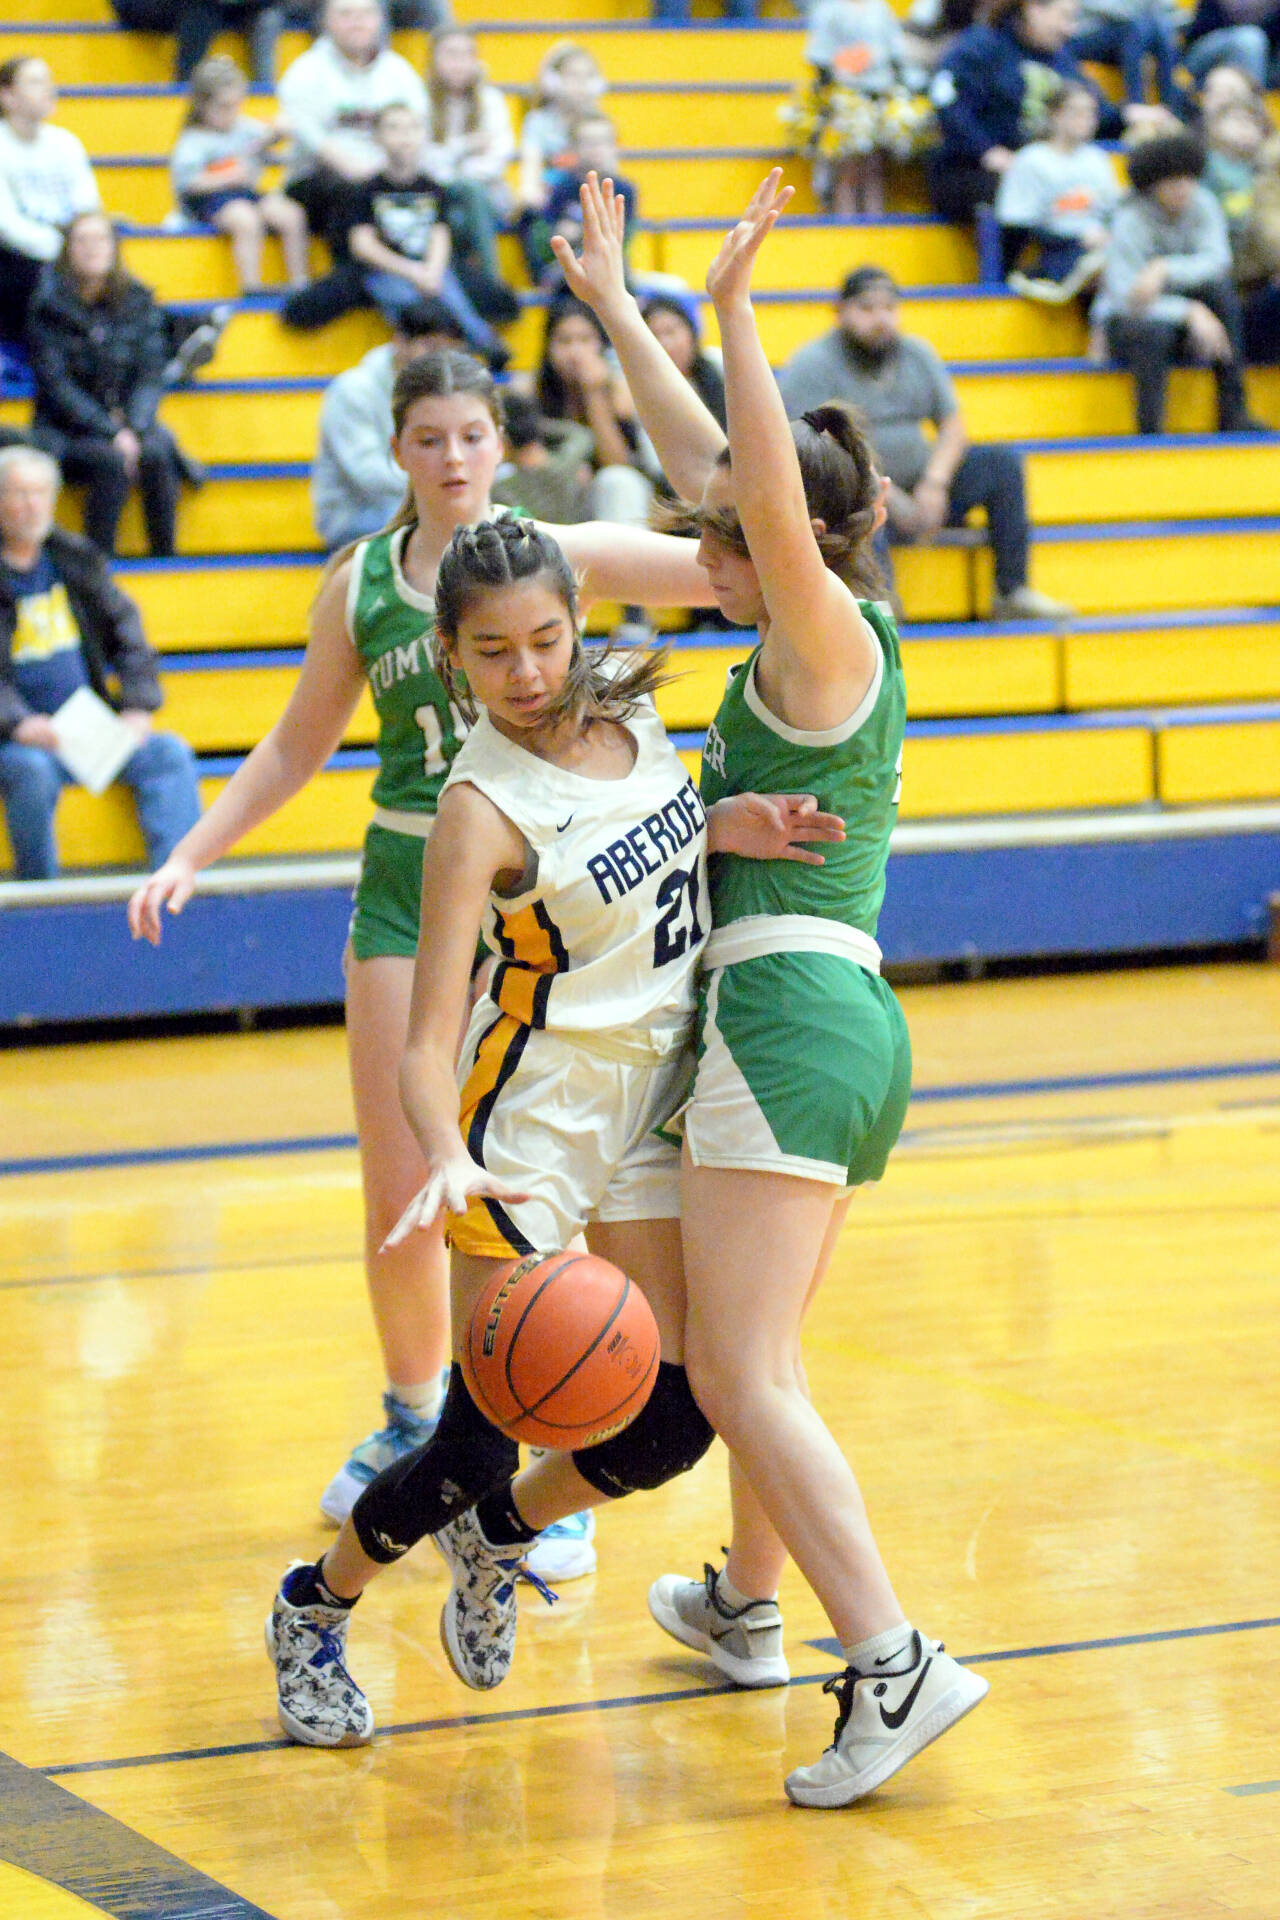 RYAN SPARKS | THE DAILY WORLD Aberdeen junior Jaylynn Phimmasone (21) looks to dribble around Tumwater’s Morgan Simmons during the Bobcats’ 65-32 loss on Friday at Sam Benn Gym in Aberdeen.